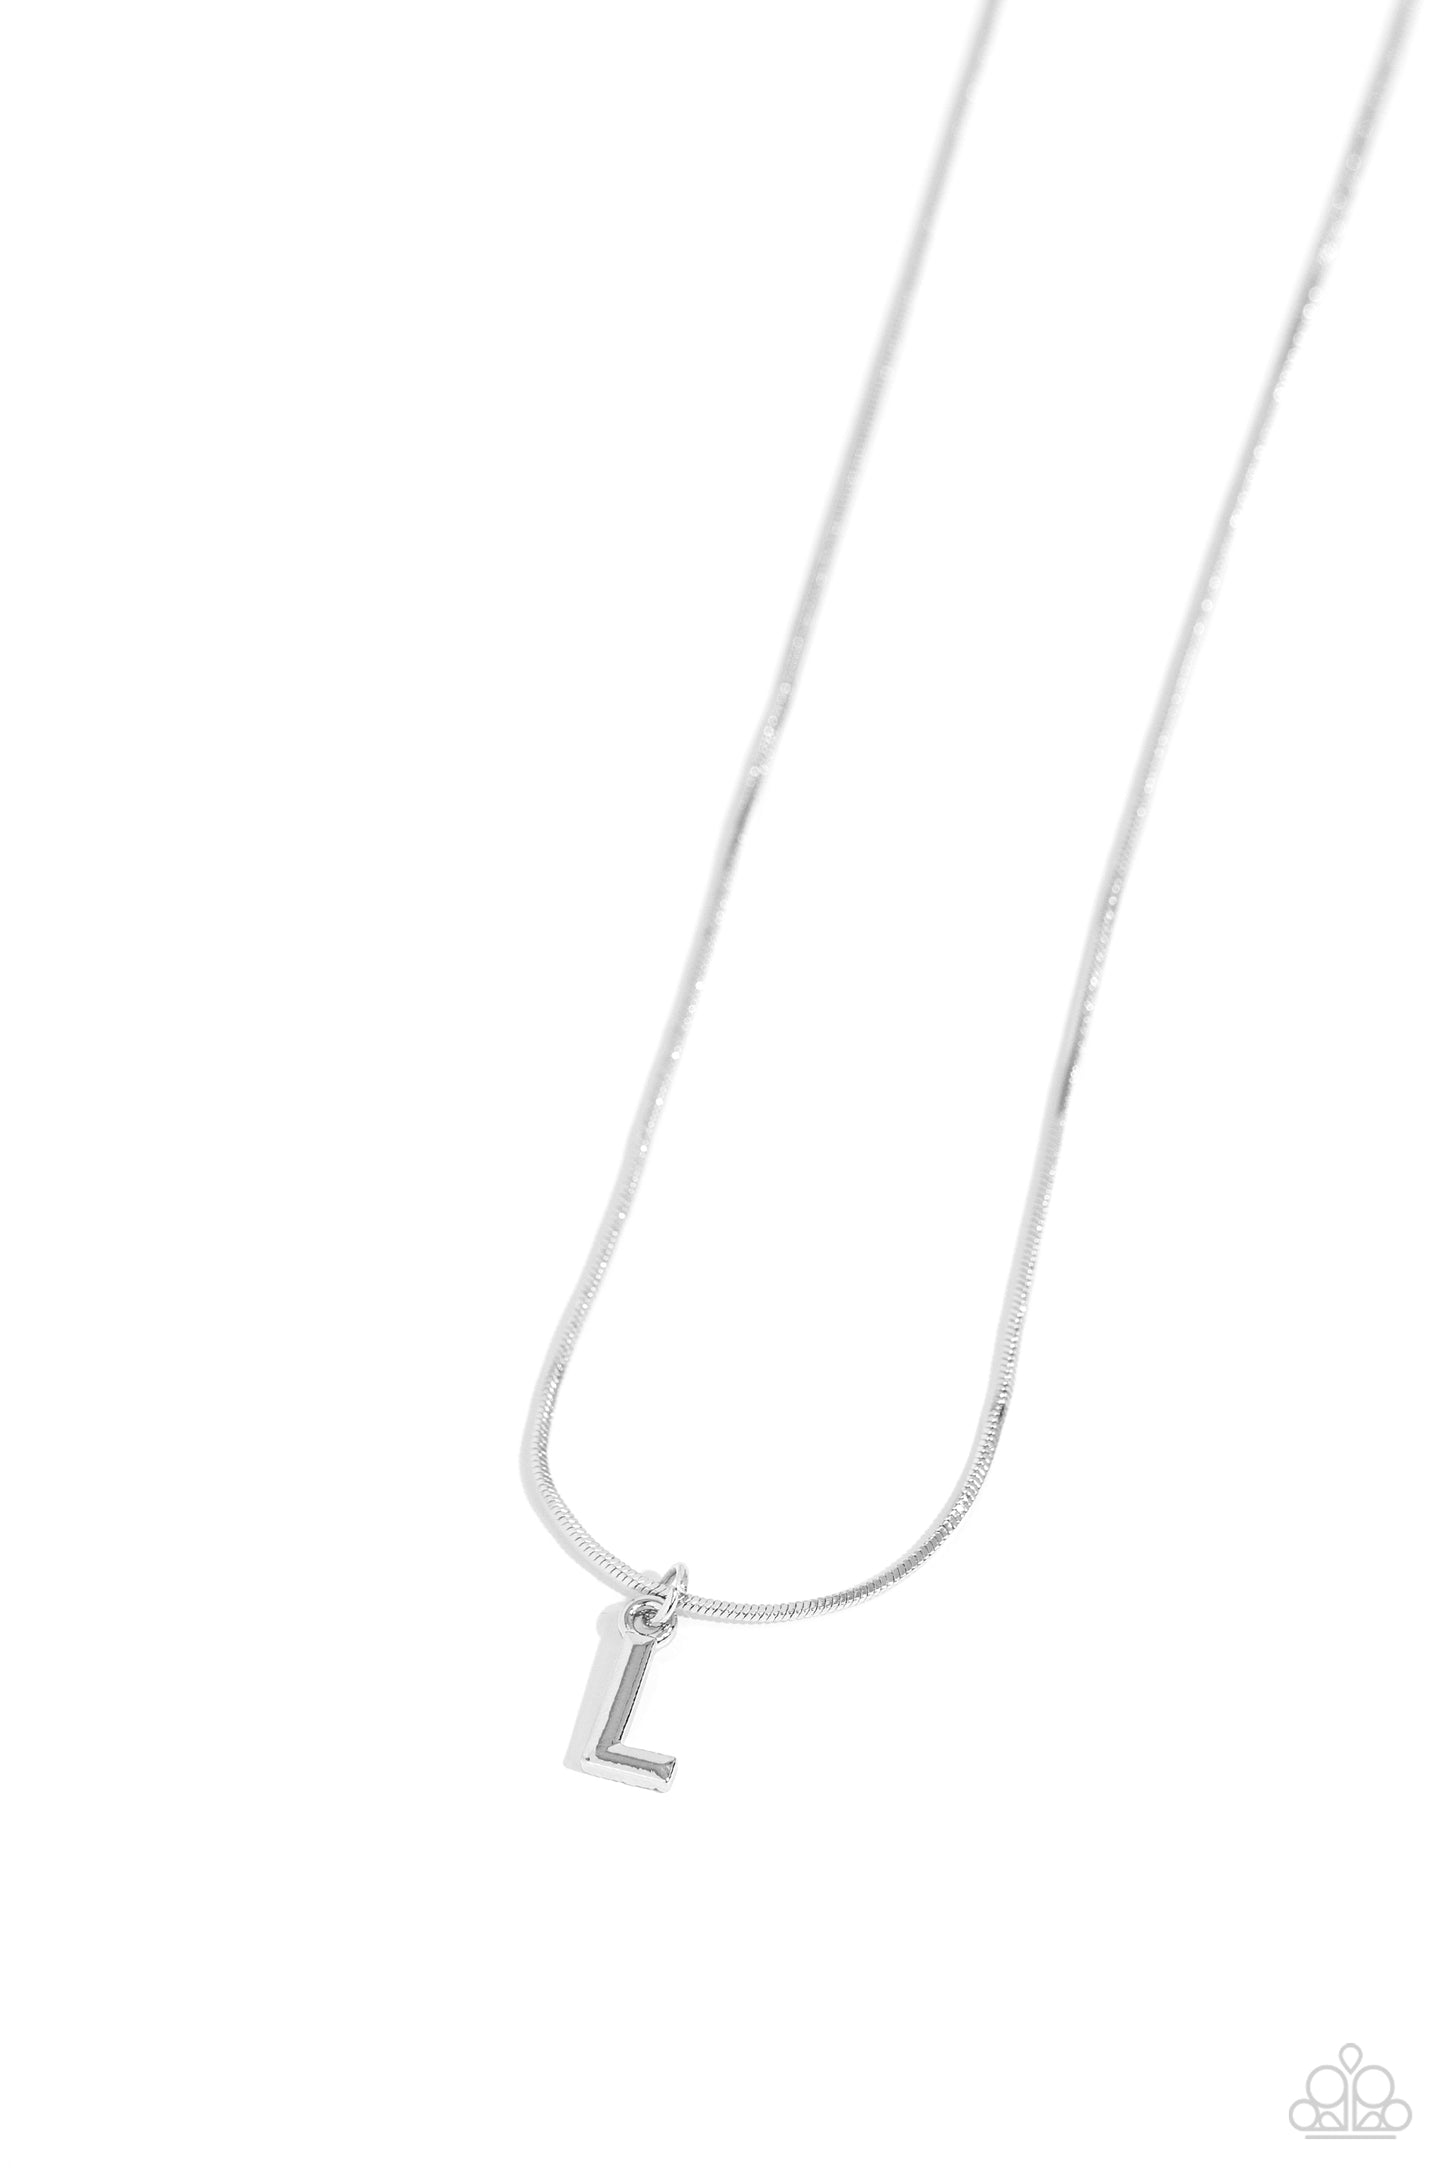 Seize the Initial Paparazzi Accessories Necklaces with Earrings - Silver - L